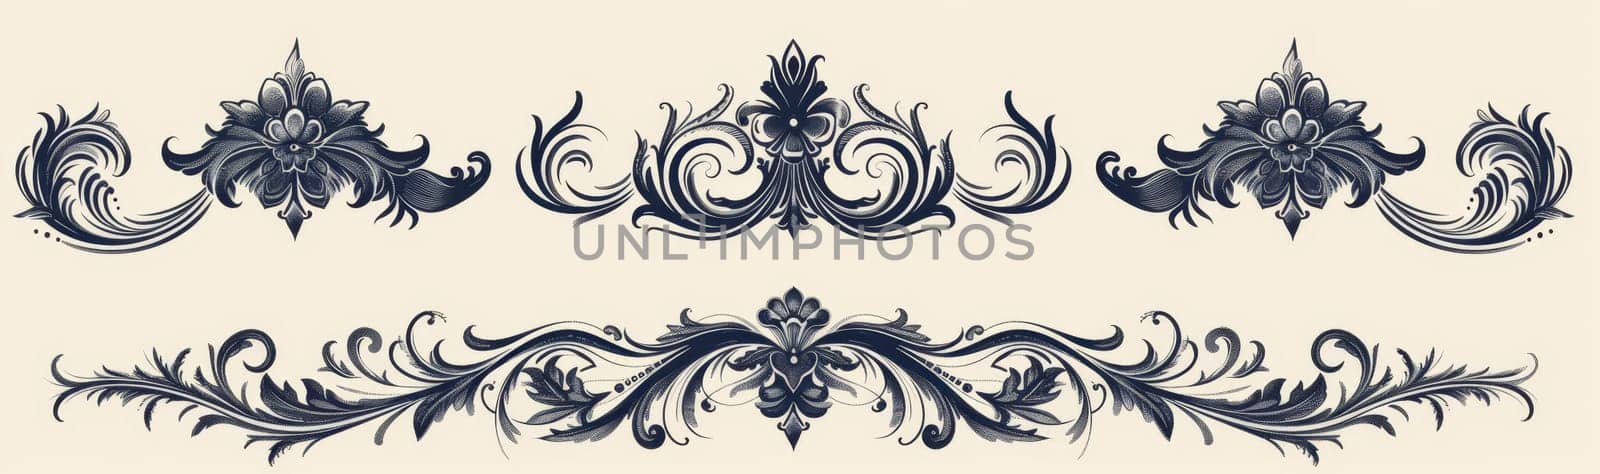 Vintage-inspired ornamental design featuring elaborate floral motifs and swirling patterns on a beige background. by sfinks